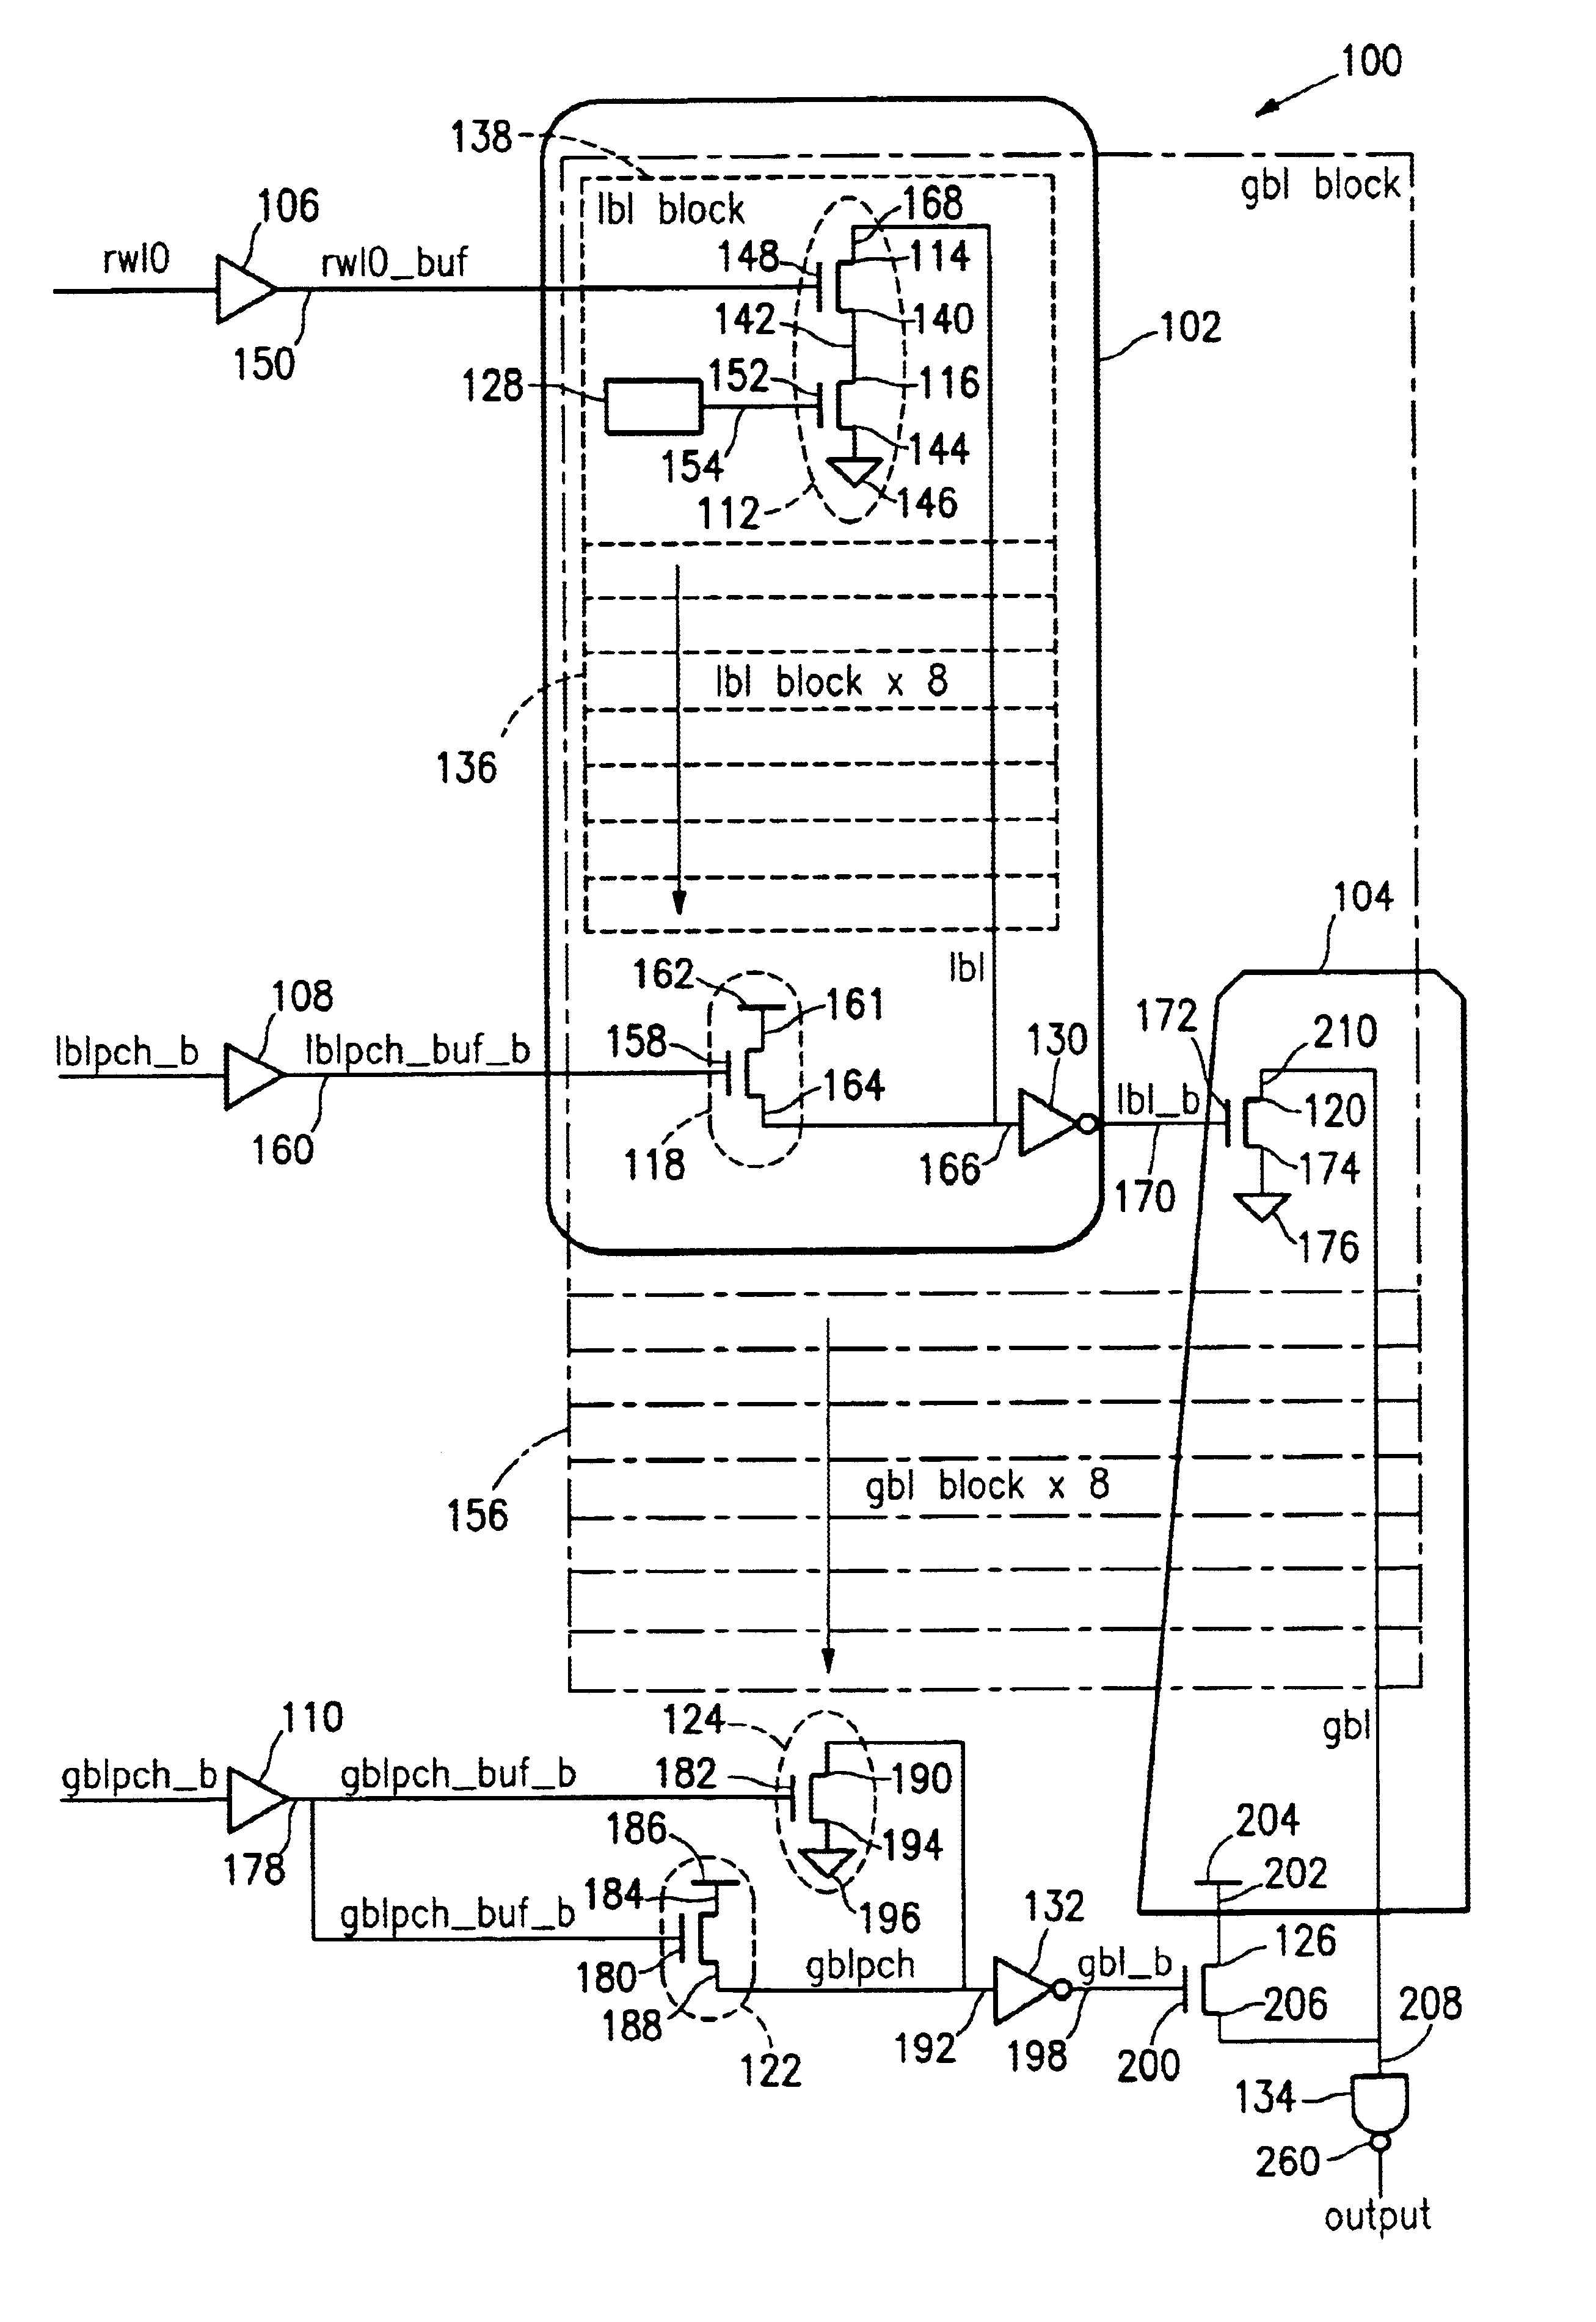 Apparatus and method for precharging and discharging a domino circuit